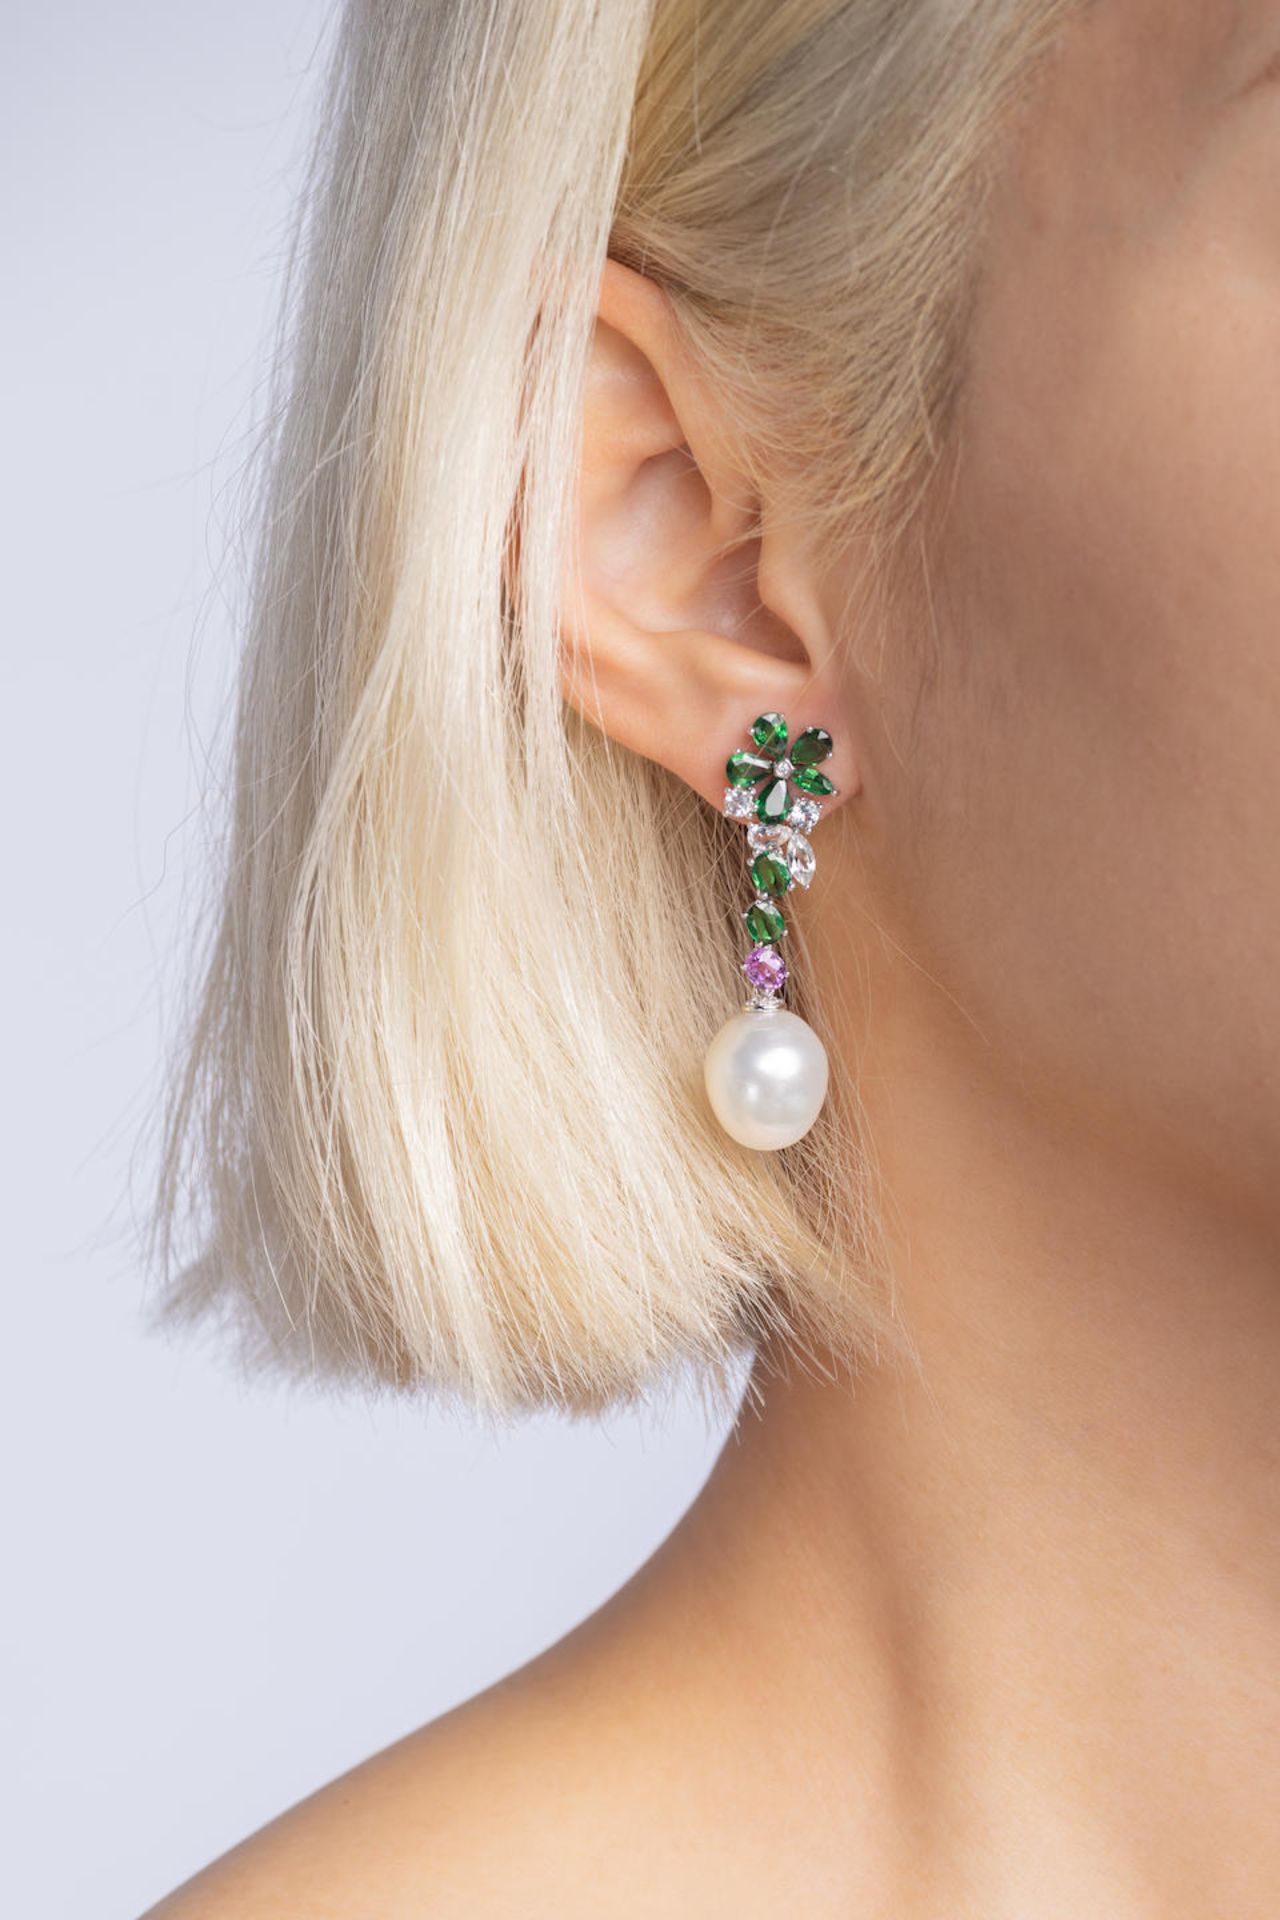 PAIR OF CULTURED PEARL, GEM-SET AND DIAMOND PENDENT EARRINGS - Image 3 of 3